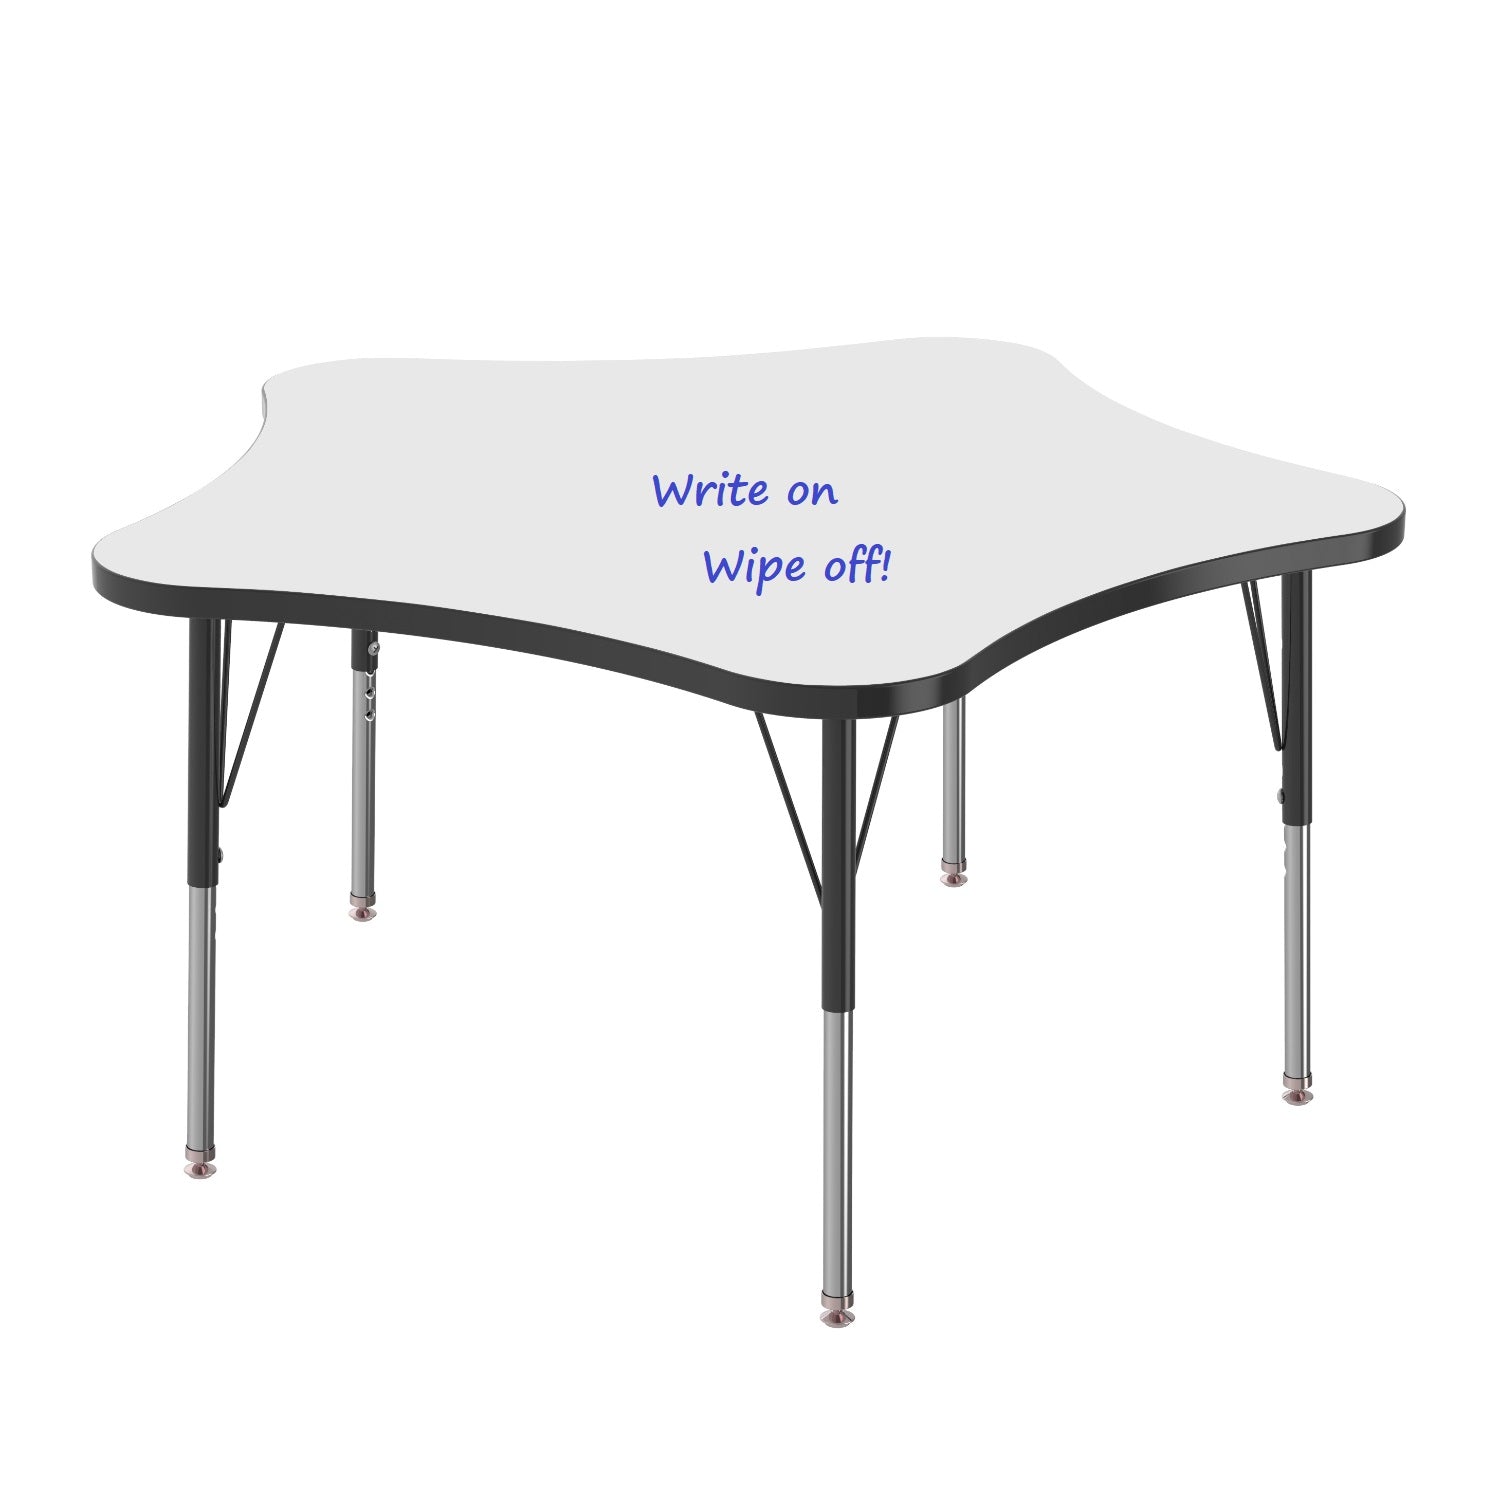 MG Series Adjustable Height Activity Table with White Dry Erase Markerboard Top, 48" 5-Star